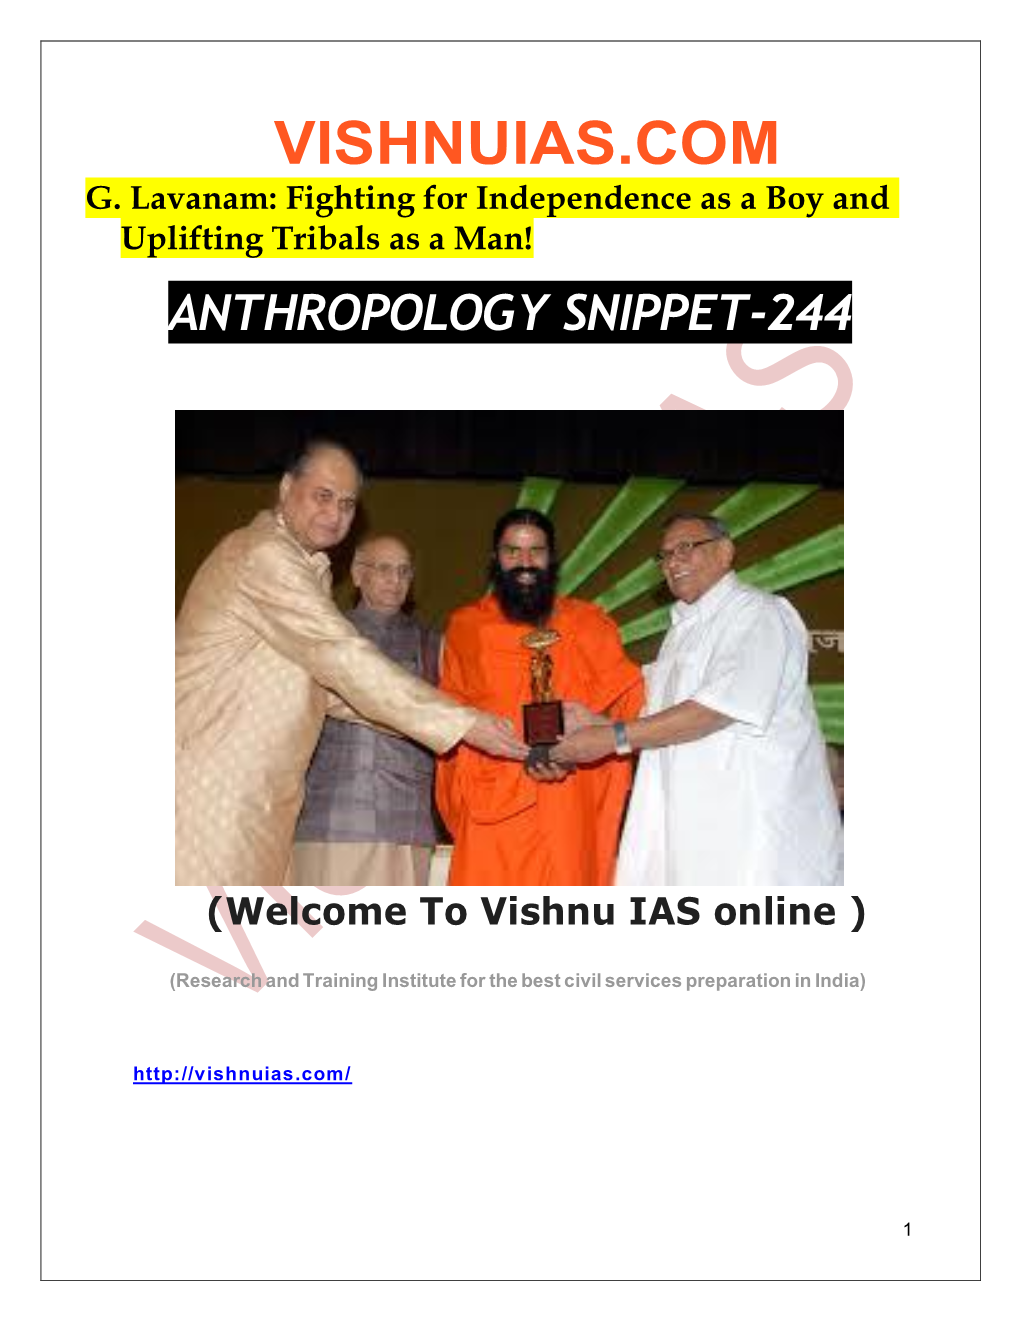 VISHNUIAS.COM G. Lavanam: Fighting for Independence As a Boy and Uplifting Tribals As a Man! ANTHROPOLOGY SNIPPET-244